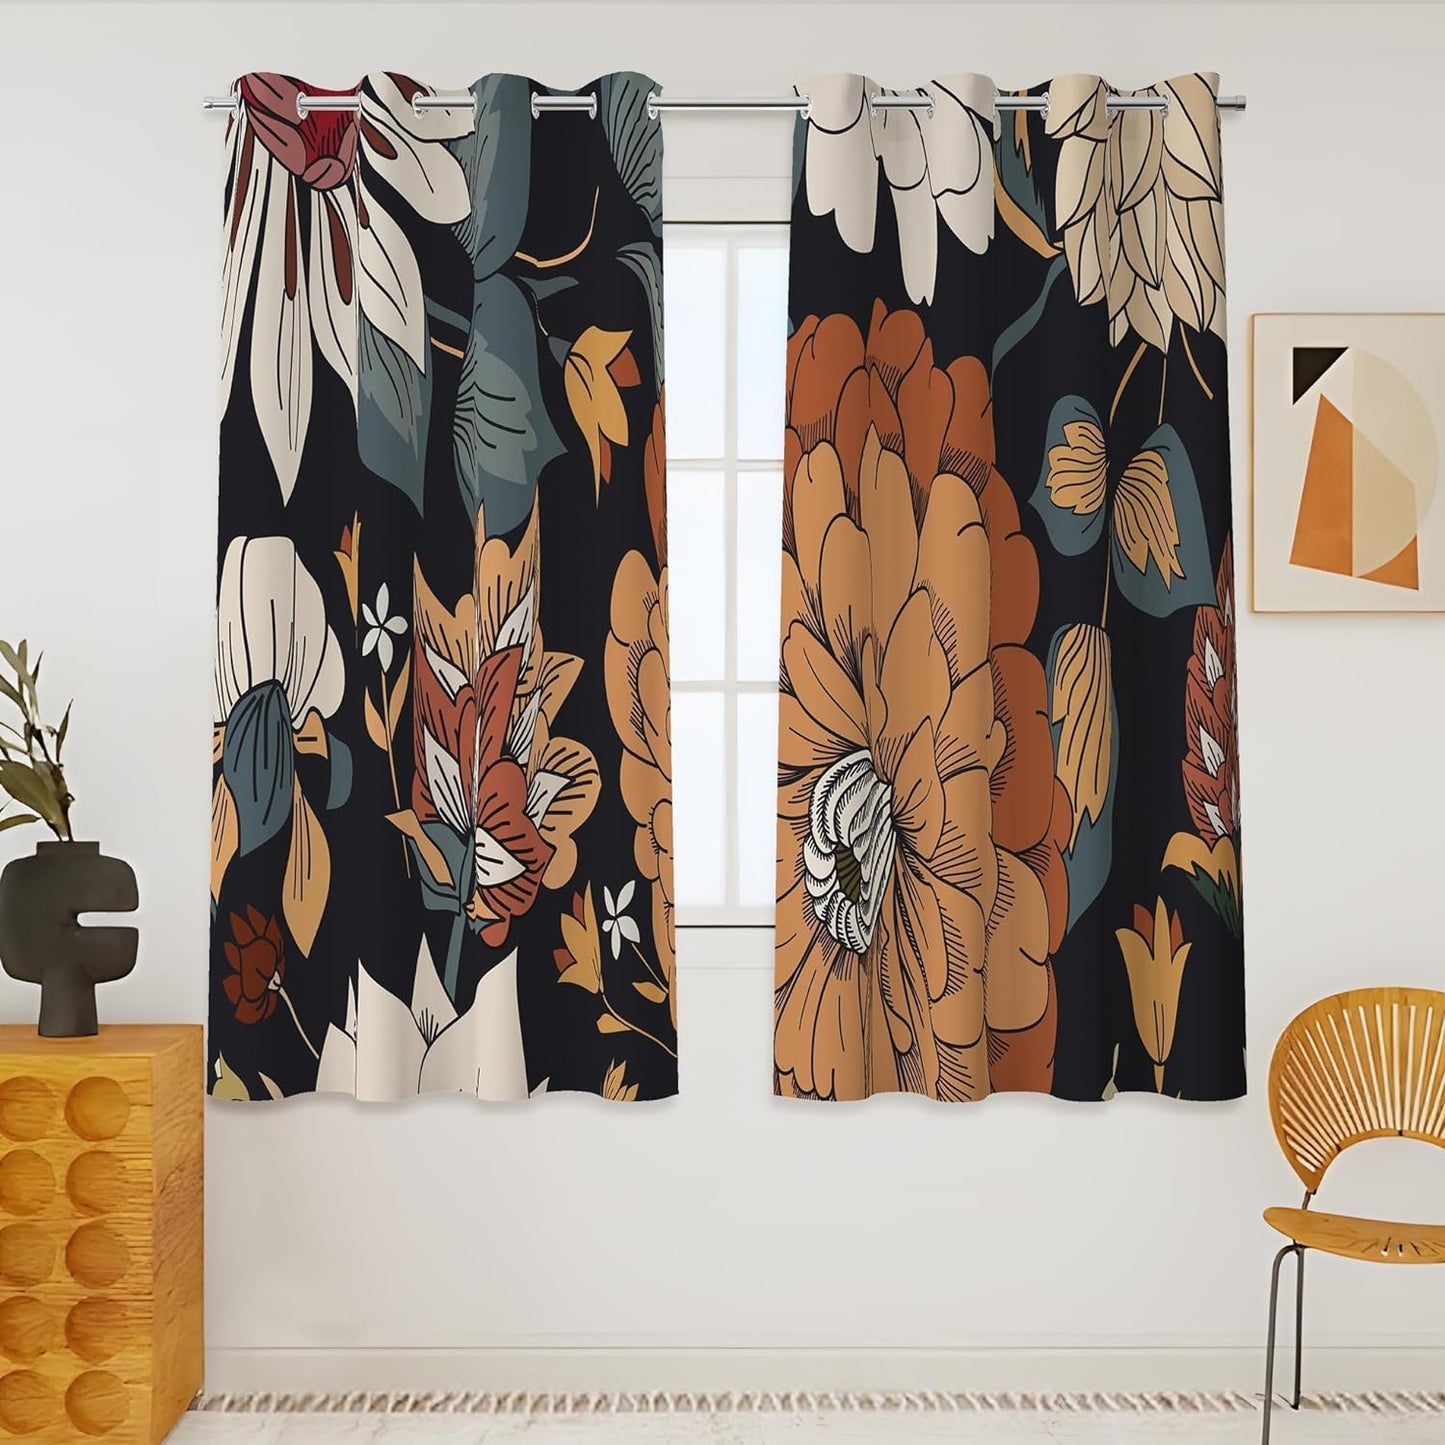 Boho Floral 100% Blackout Curtains for Living Room 96 Inch Long 2 Panels Mid Century Botanical Black Out Curtains for Bedroom Grommet Thermal Insulated Room Darkening Window Drapes,52Wx96L  Tyrot Boho Floral 52W X 45L Inch X 2 Panels 